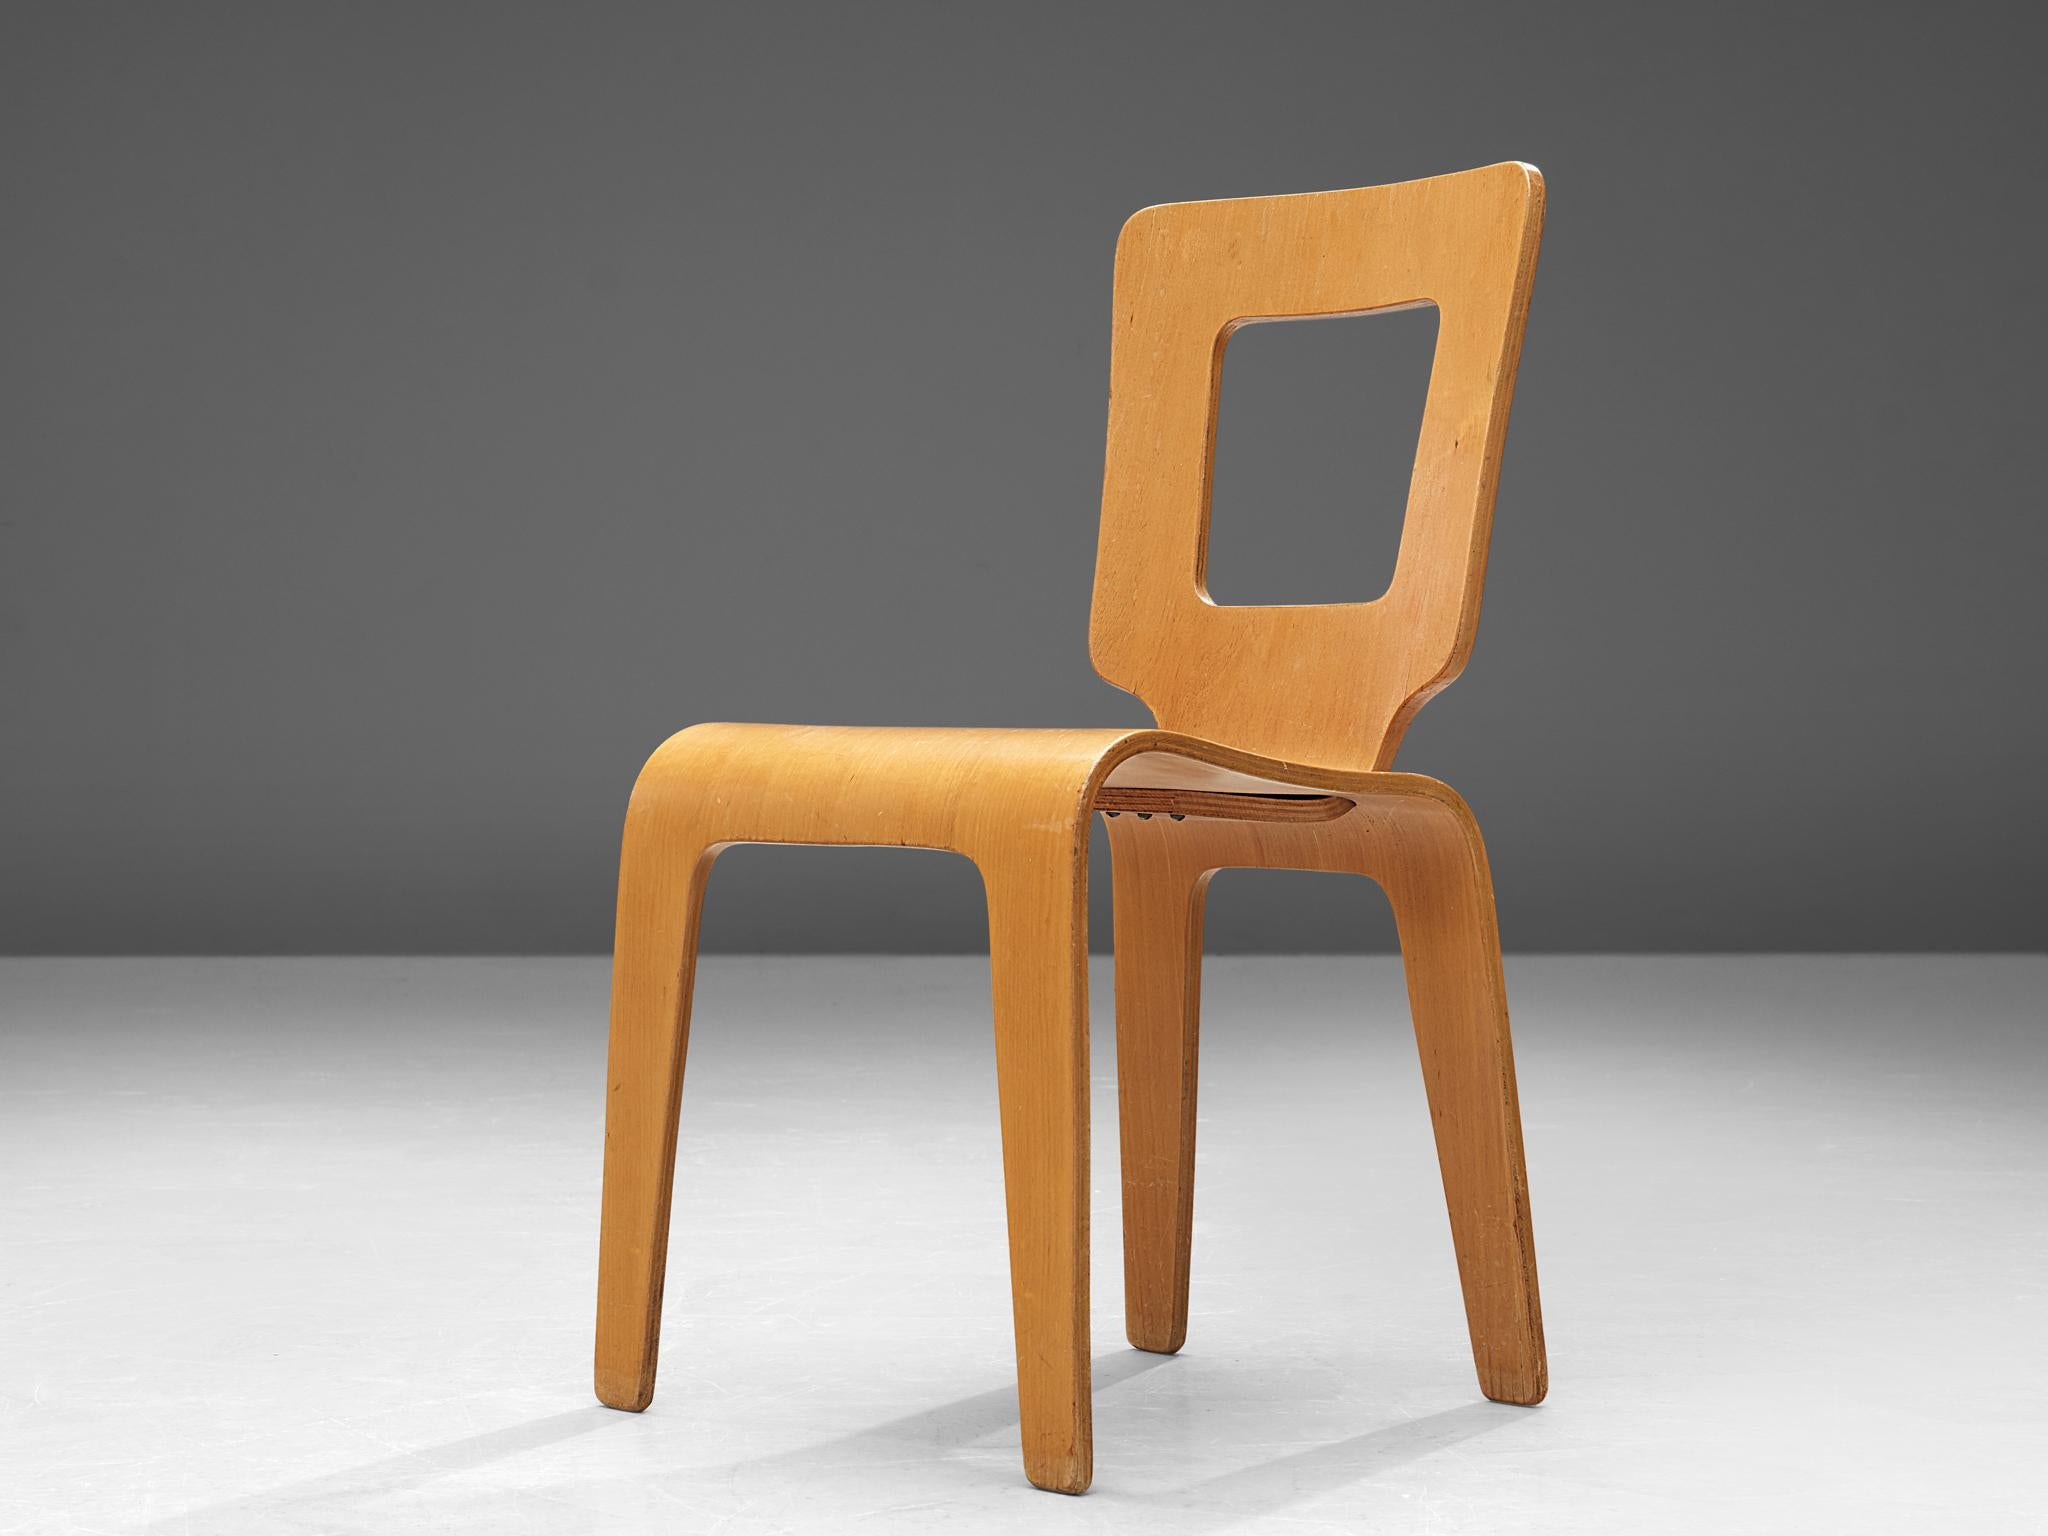 Herbert von Thaden and Donald Lewis Jordan for Thaden-Jordan Furniture Company, dining chair, model, 102, plywood, United States, circa 1947 

This side chair has a splendid construction that epitomizes a simplistic, natural and timeless aesthetics.